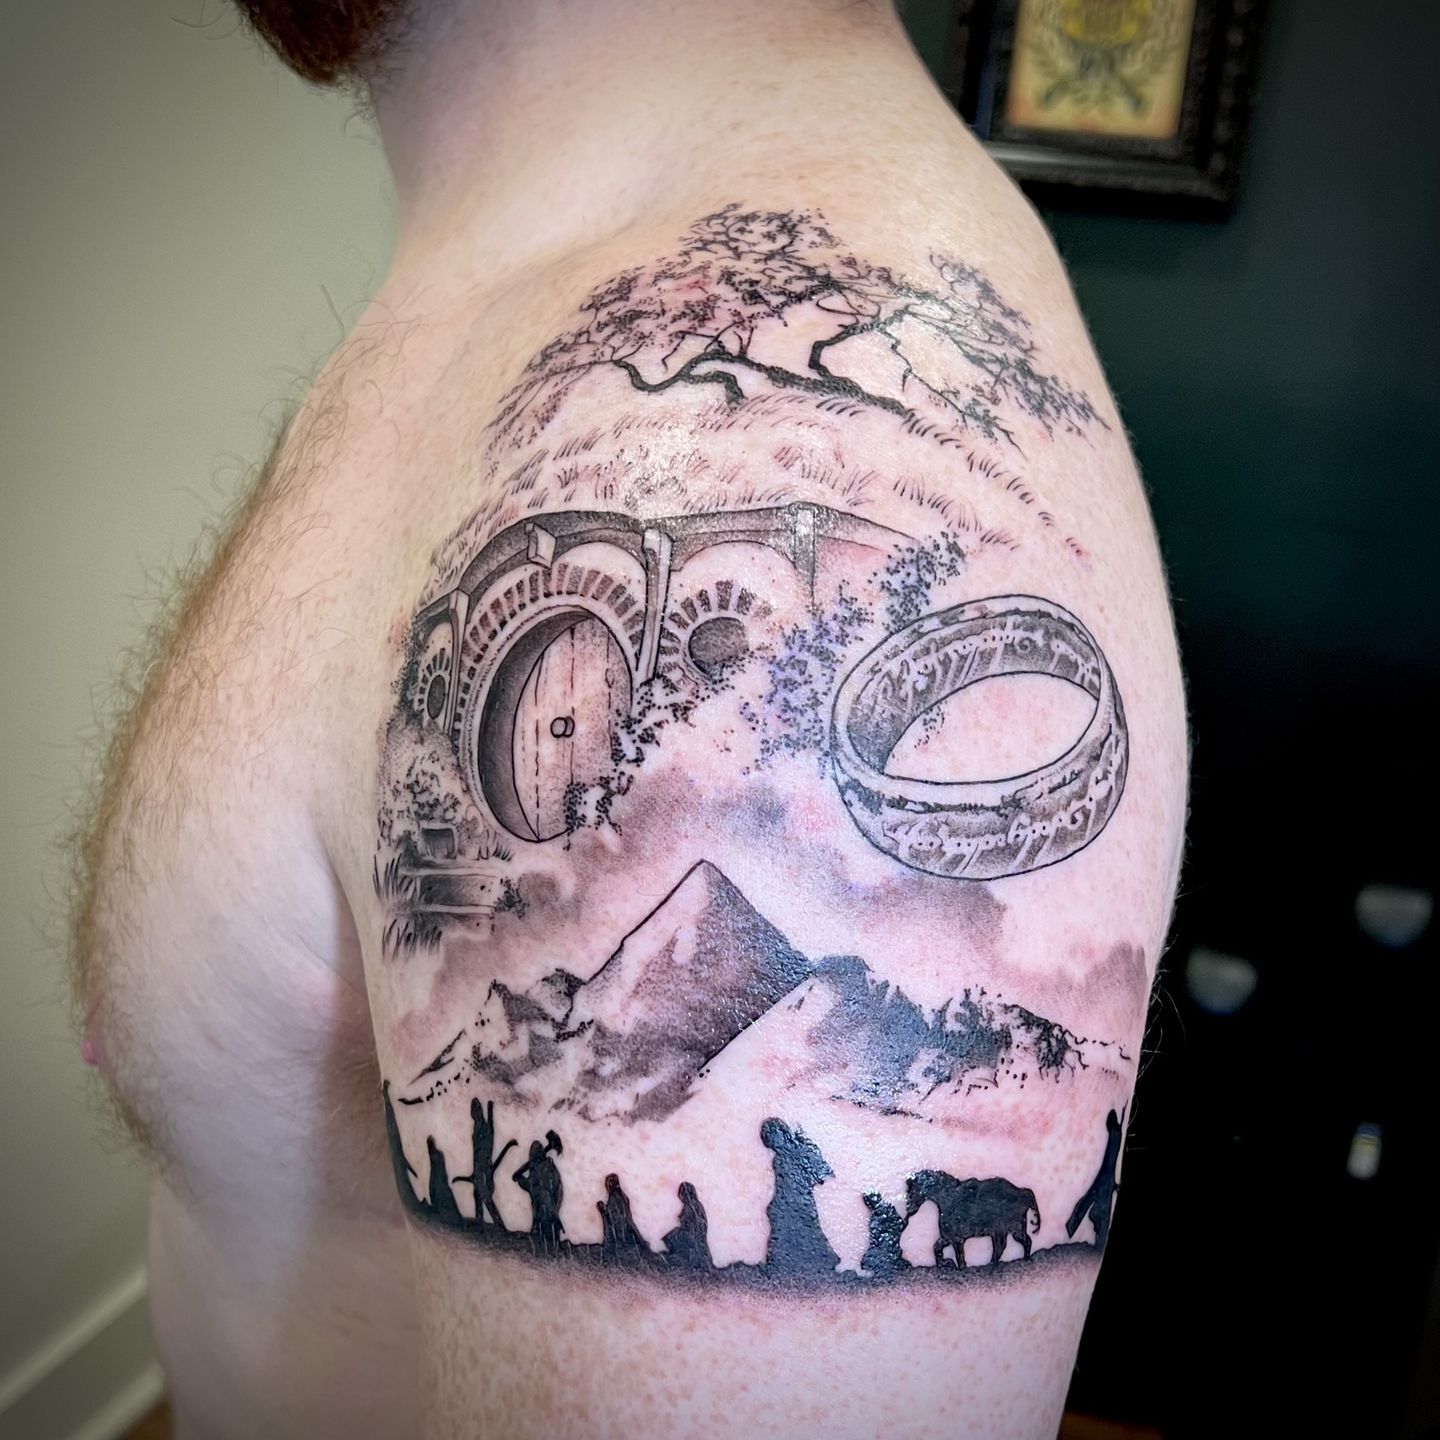 Bag end, the shire, hobbit hole tattoo done by Henbo Henning | Sleeve  tattoos, Hand tattoos for guys, Lord of the rings tattoo